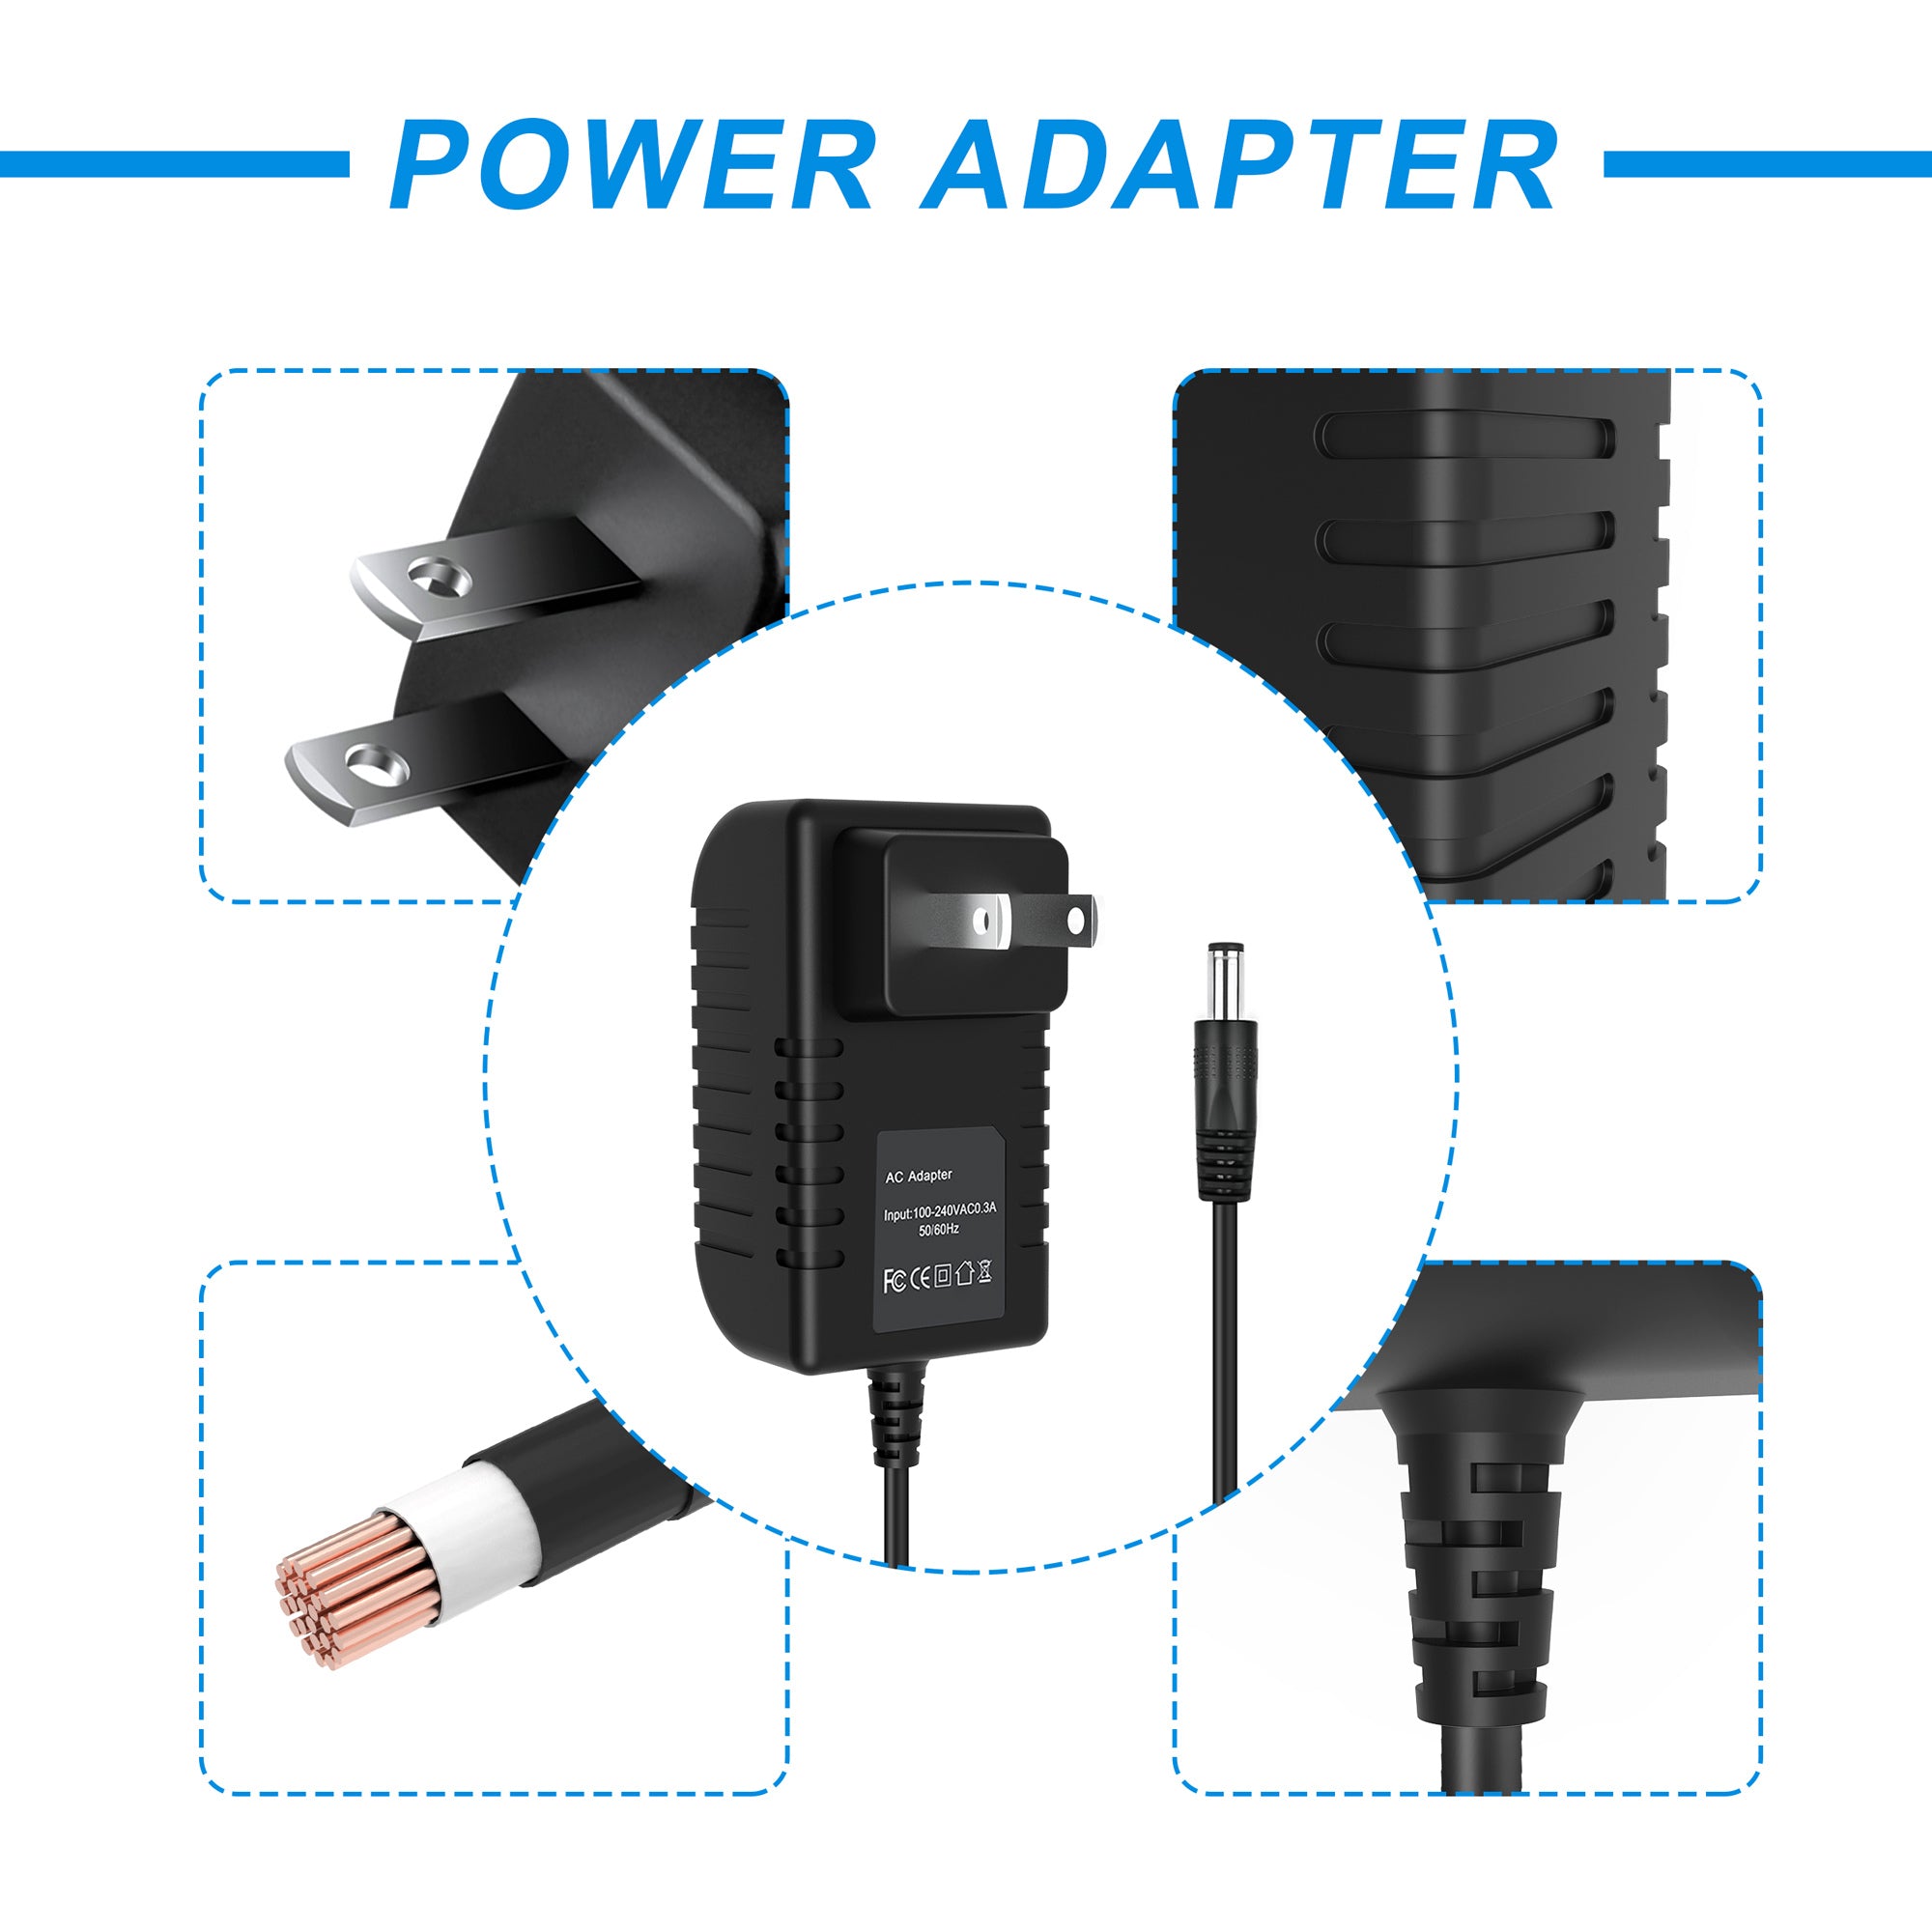 AbleGrid AC/DC Adapter Compatible with GRECOM Adapter No. GA-07D-2610 GA07D2610 GA-07B-2610 GRE Digital Trunking Scanning Receiver Triple Desktop Mobile/Base Radio Scanner Power Supply Cord Cable Charger